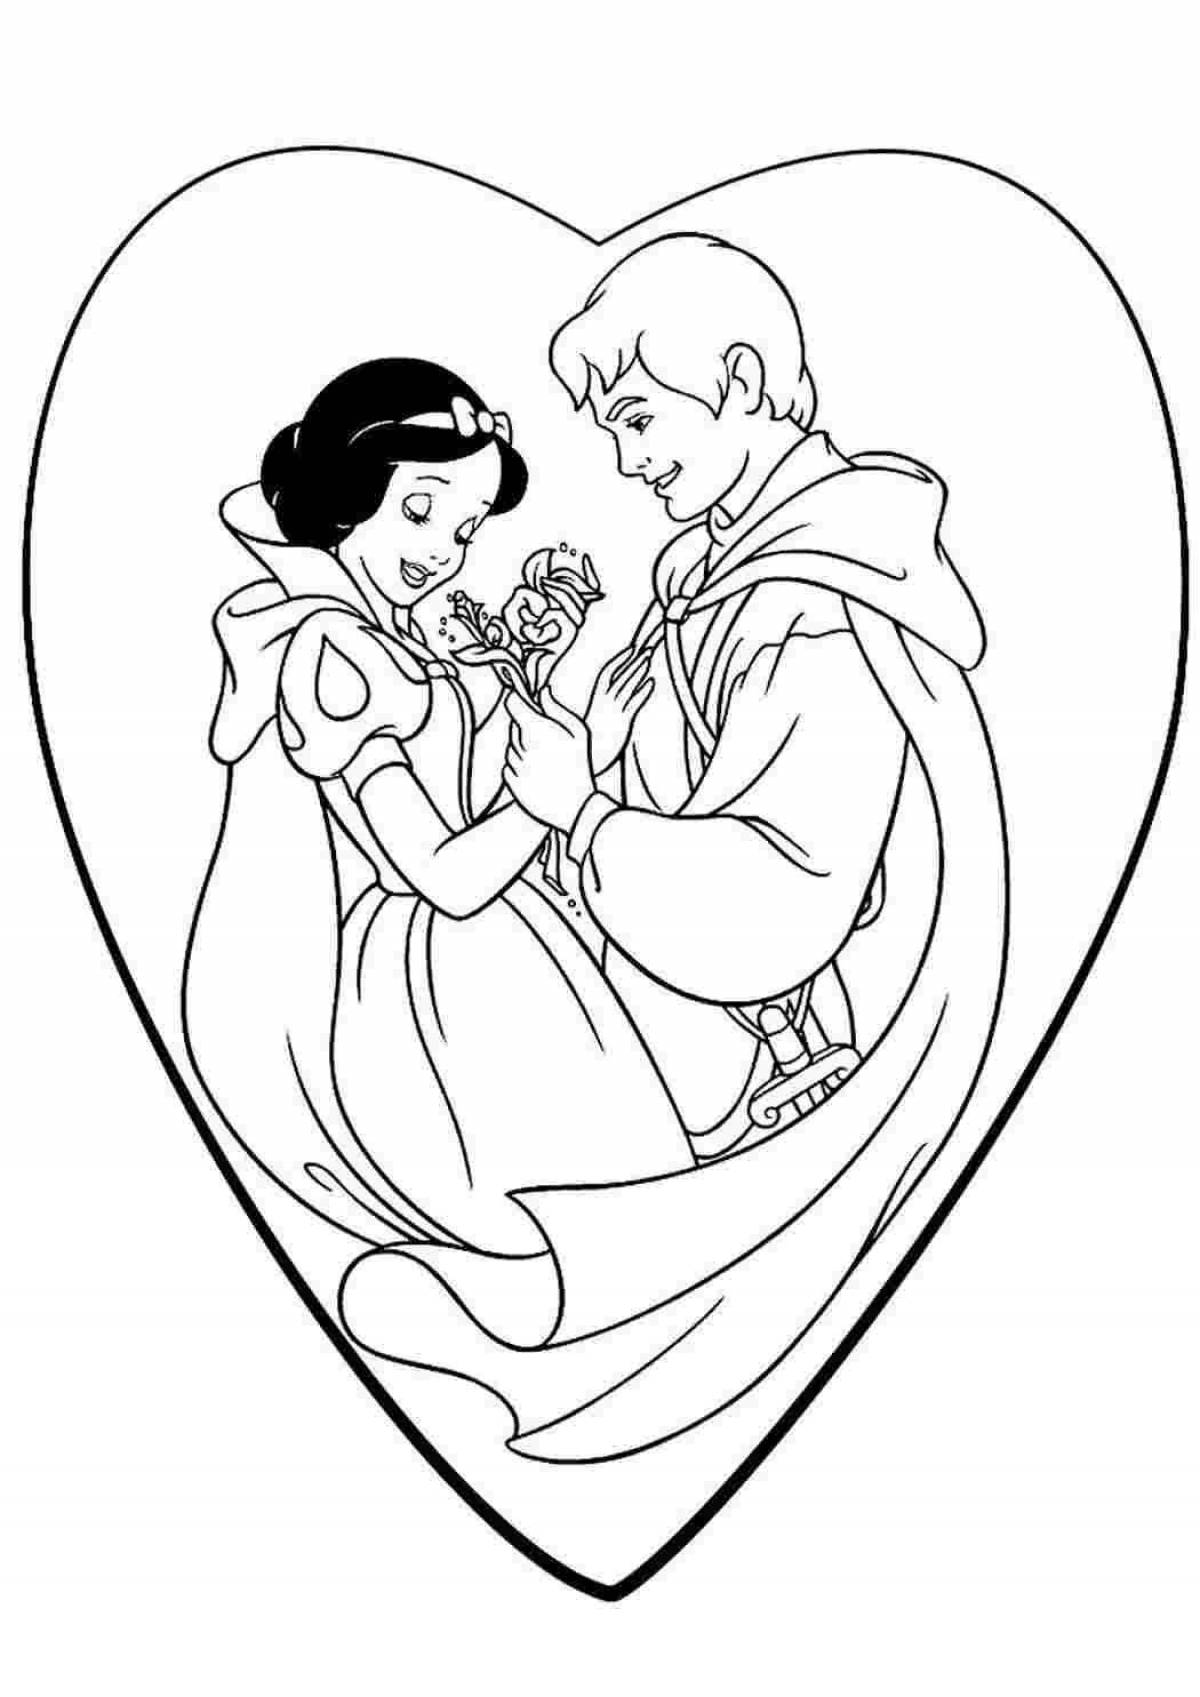 Amazing snow white coloring book for girls